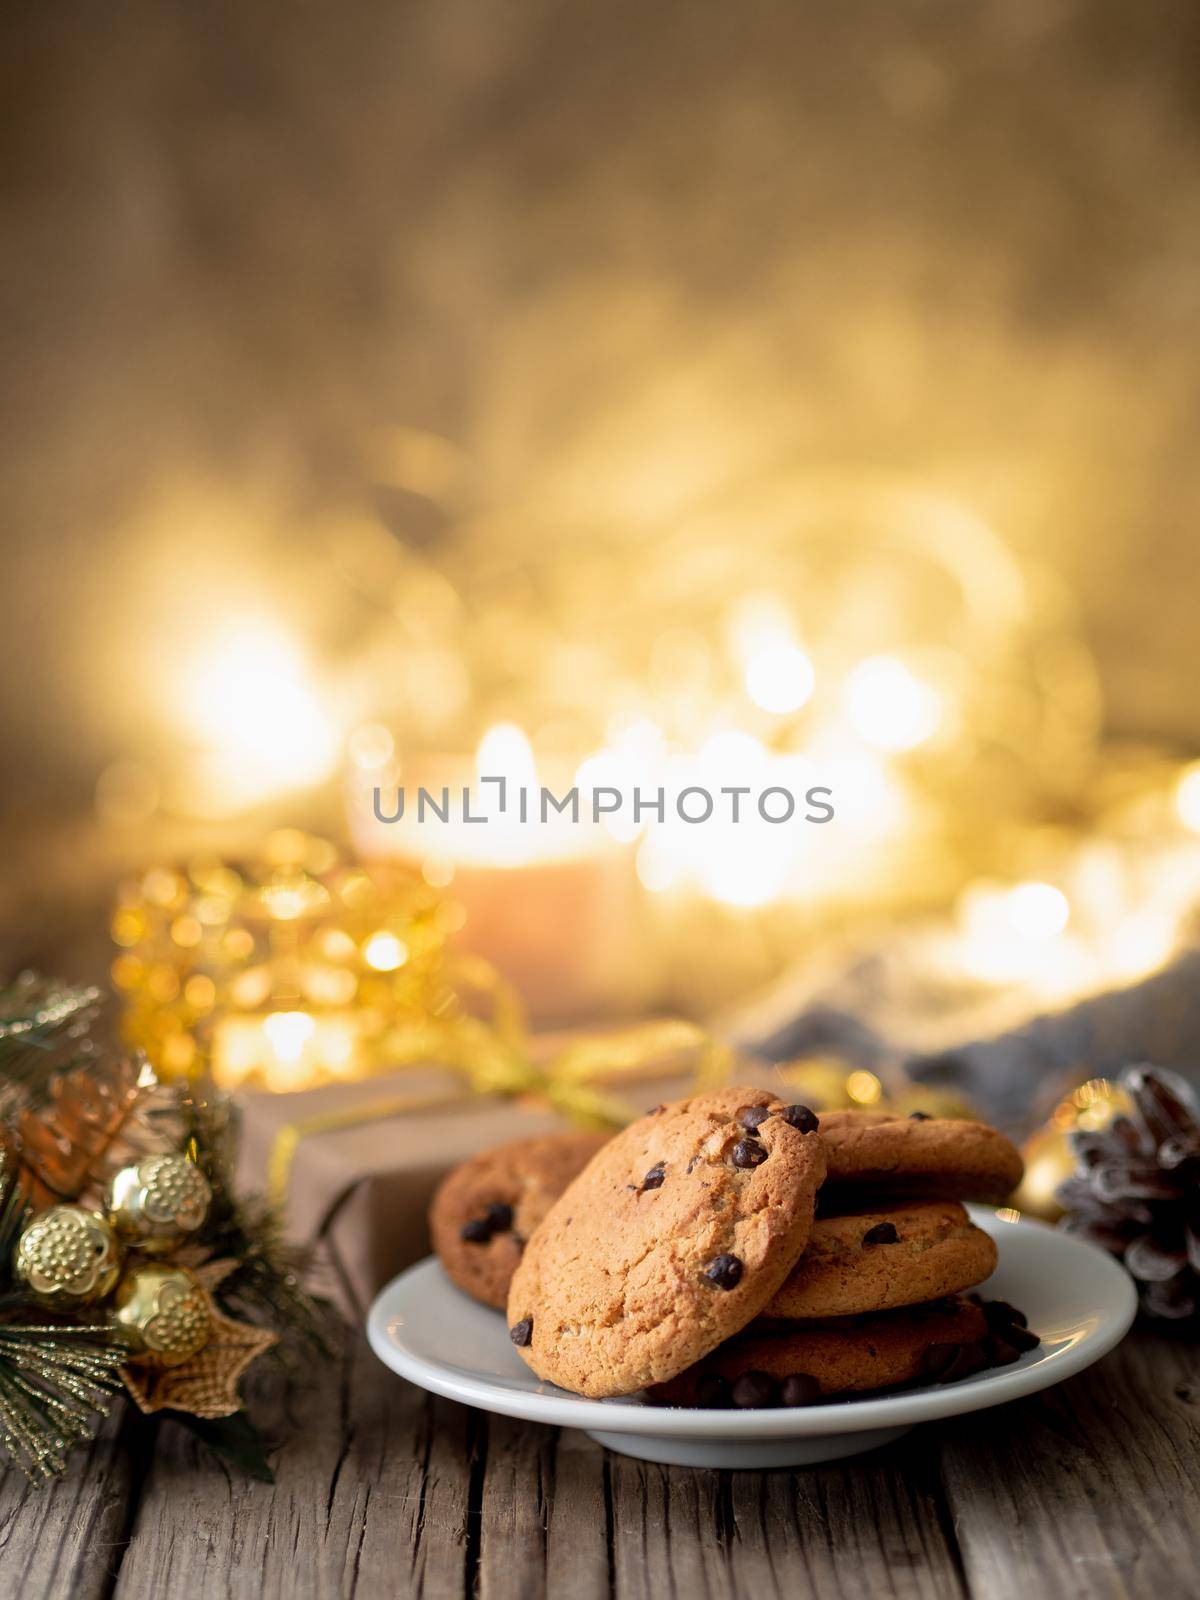 Chocolate chip cookies on dark christmas background. Cozy evening, Christmas decorations, candles and lights garlands